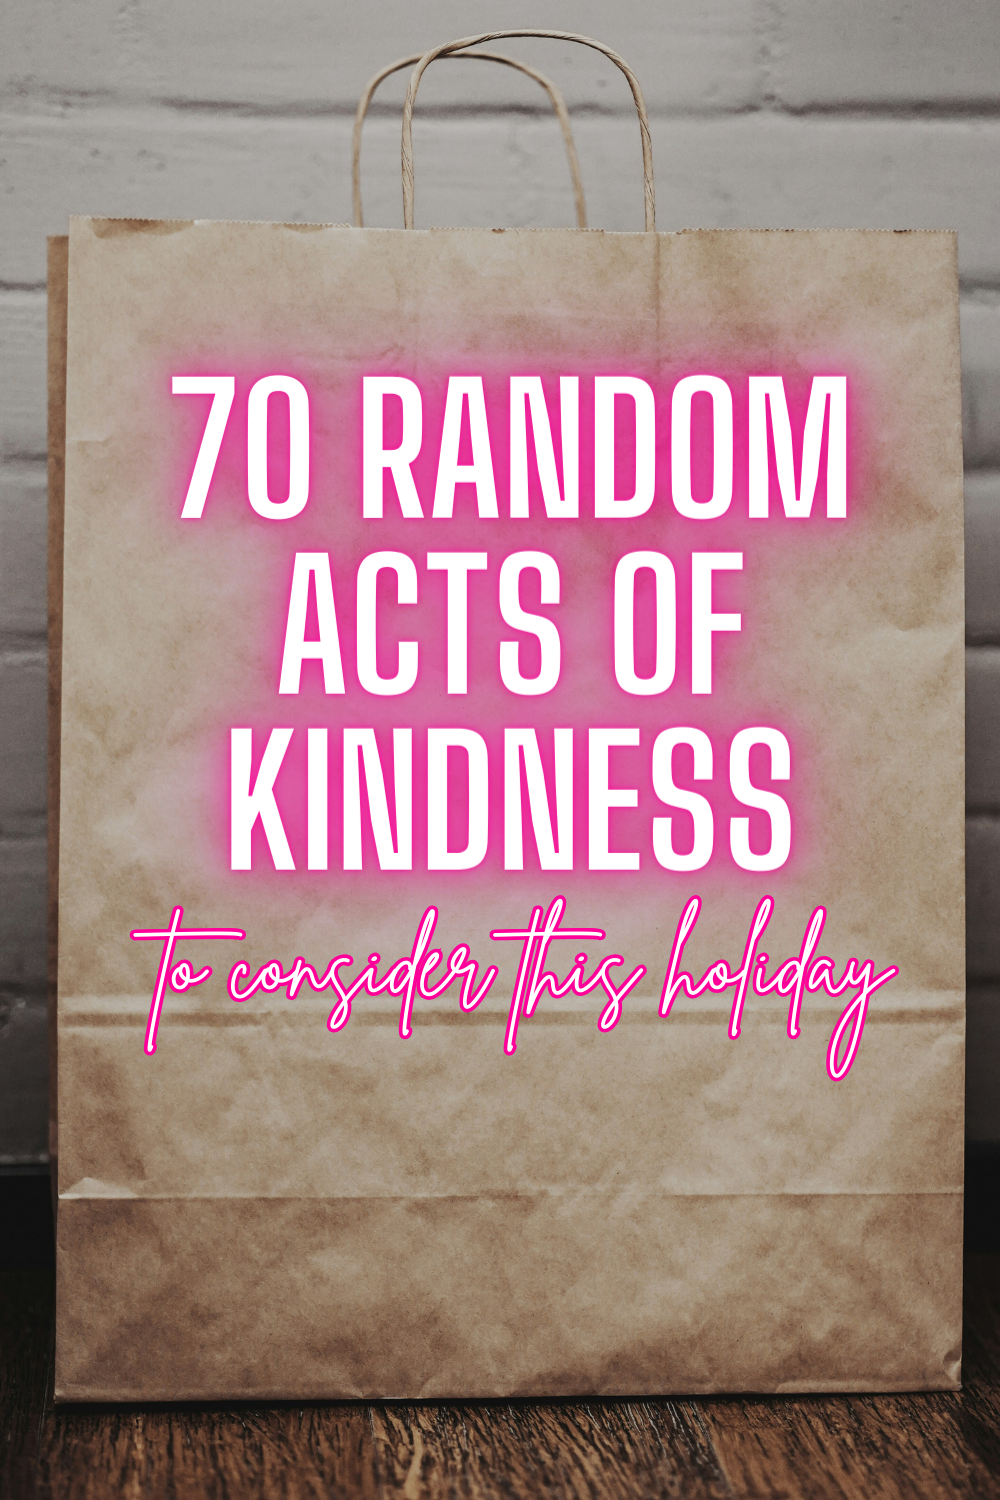 Looking to pay it forward this holiday season? Here are 70 Random Acts of Kindness to consider.